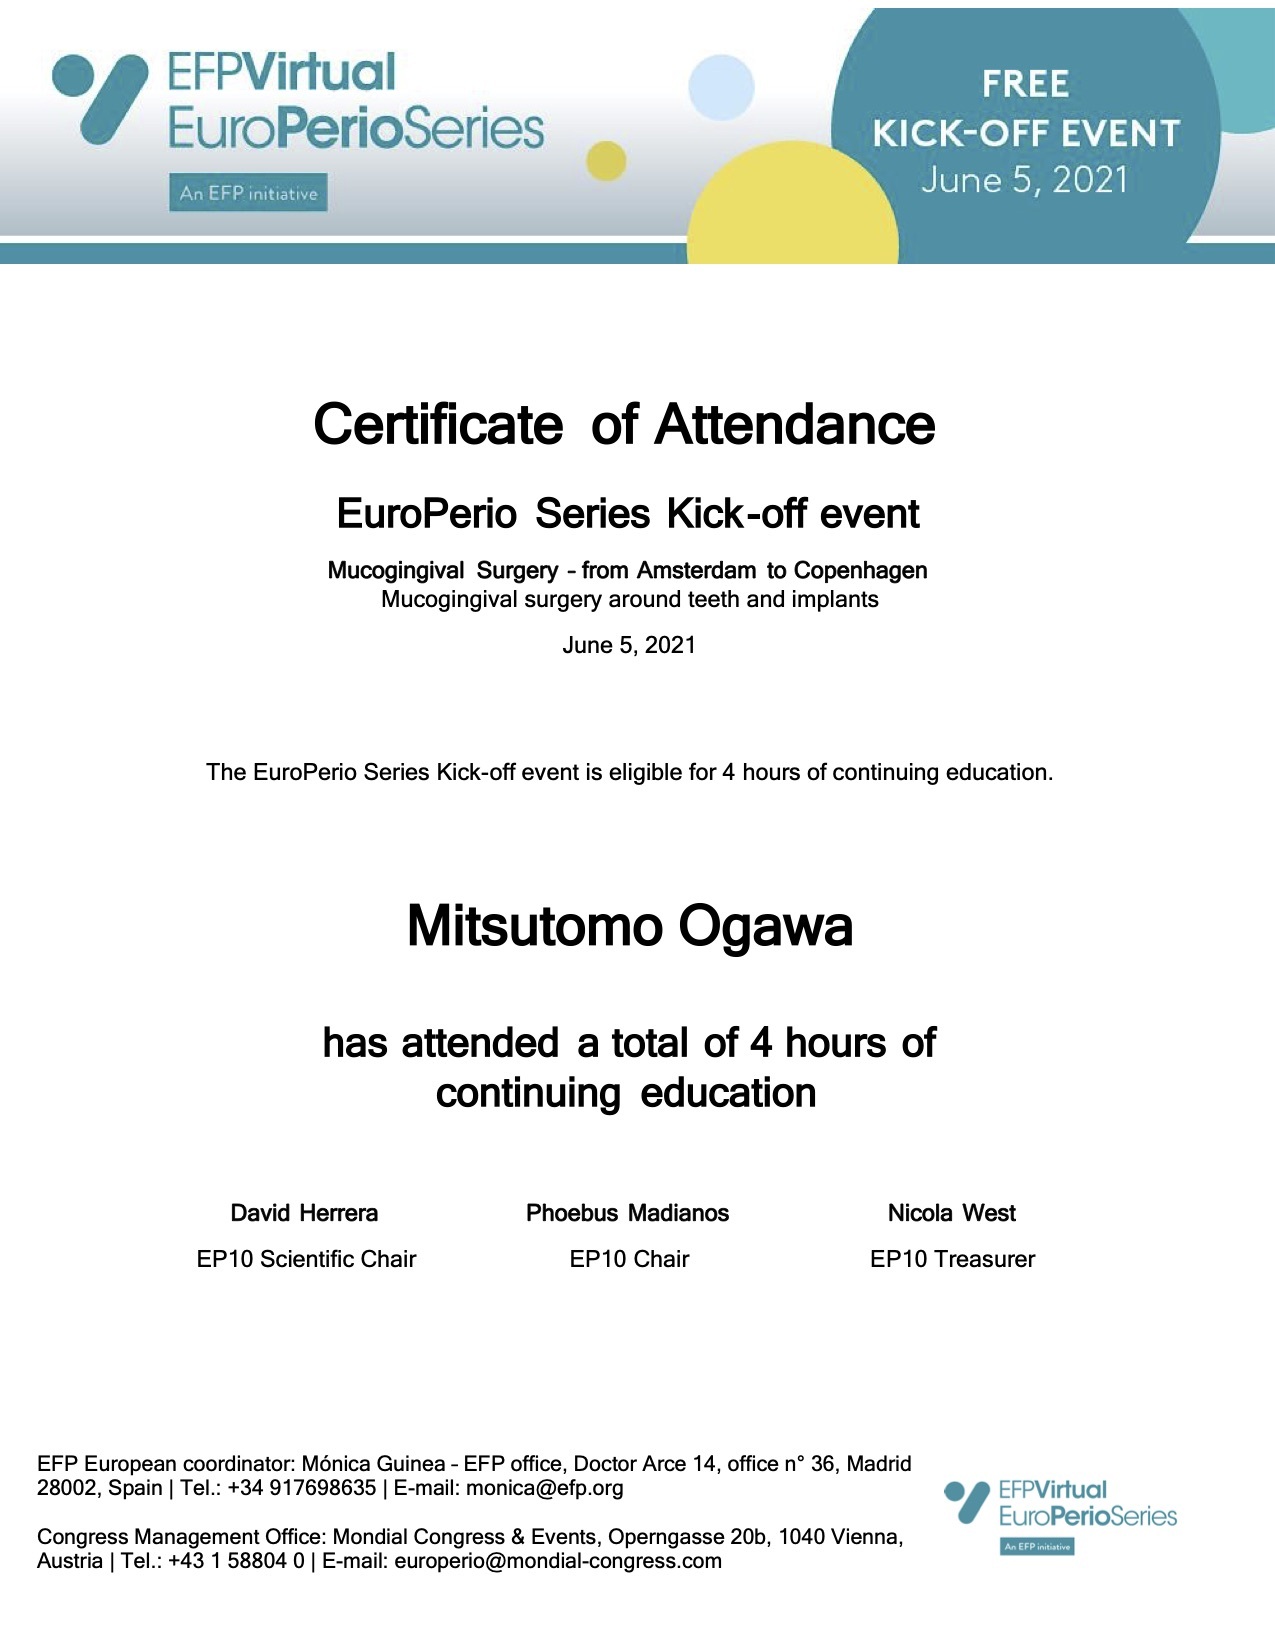 EPS Kickoff - Certificate of attendance